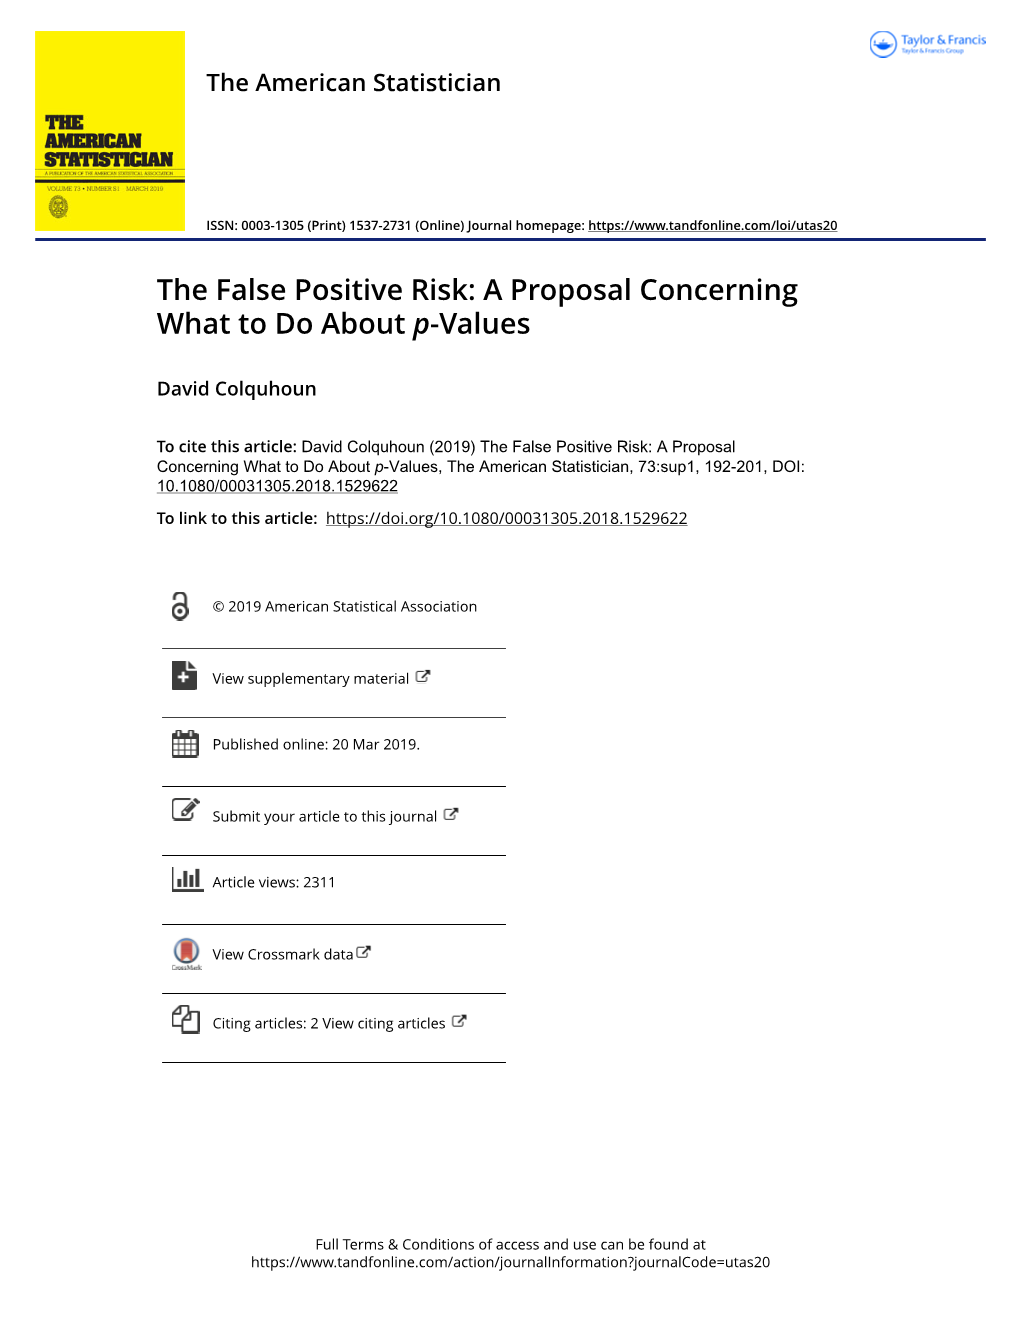 The False Positive Risk: a Proposal Concerning What to Do About P-Values